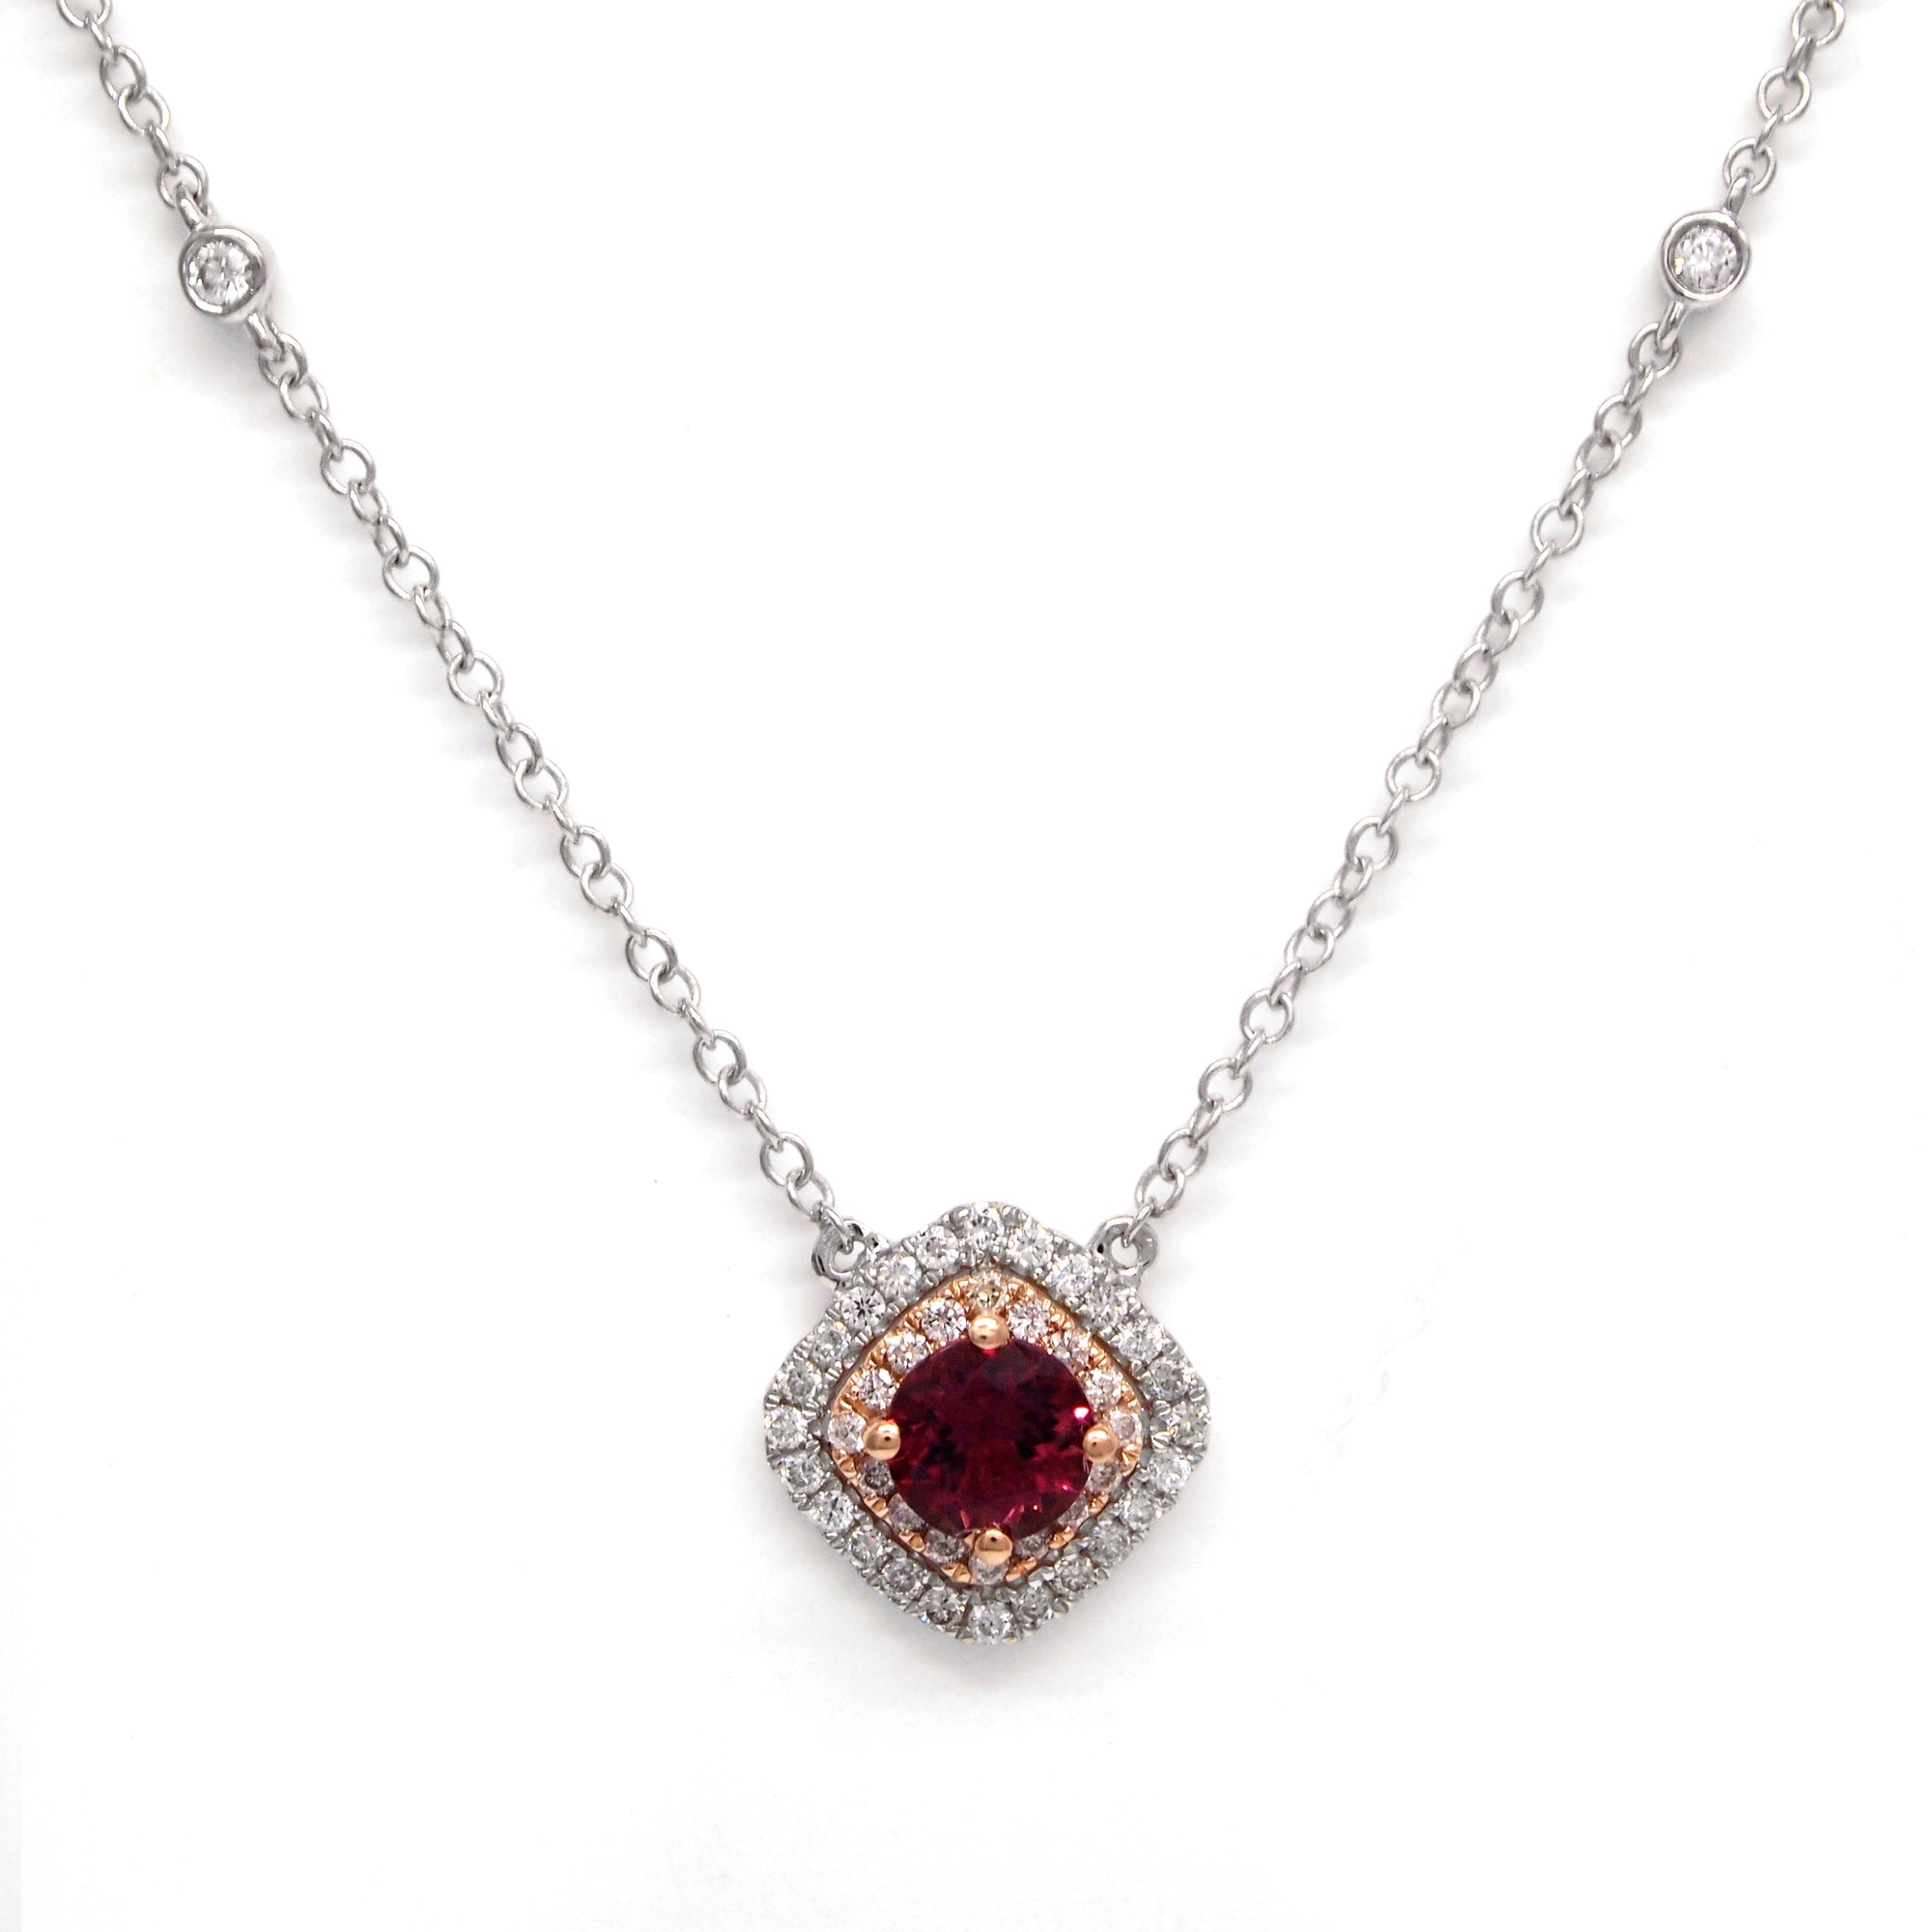 14K White and Rose Gold Pink Tourmaline And Diamond Necklace